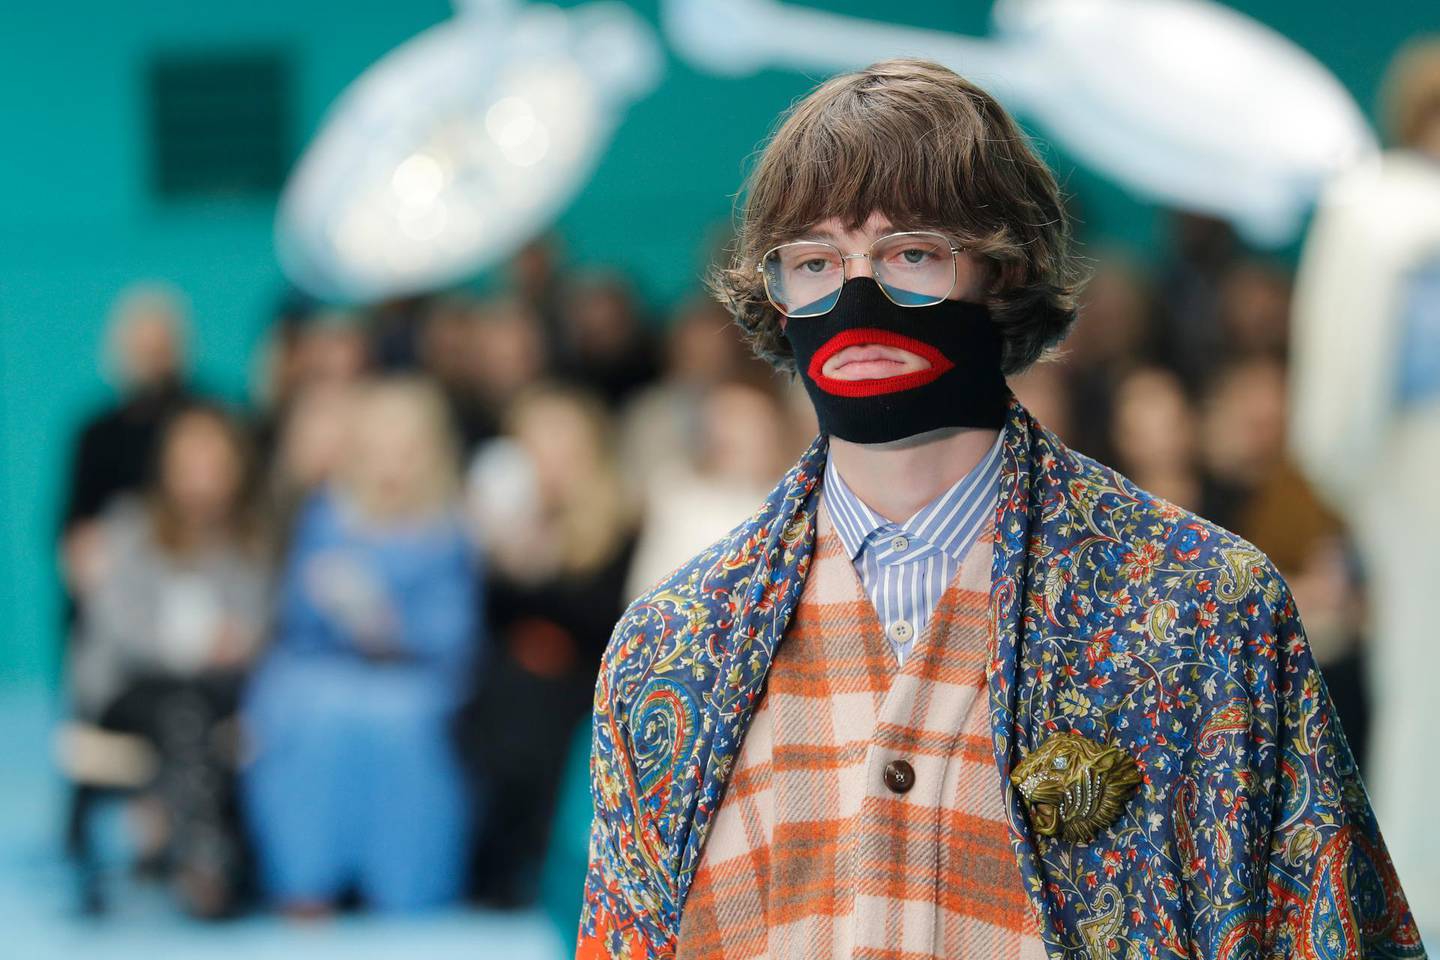 FILE - In this Feb. 21, 2018, file photo, a model wears a creation as part of the Gucci women's Fall/Winter 2018-2019 collection, presented during the Milan Fashion Week, in Milan, Italy. Italian fashion designer Gucci is announcing a major push to step up its diversity hiring following an uproar over an $890 sweater that resembled blackface, Friday, Feb. 15, 2019. The company also says it will hire a global director for diversity and inclusion, a newly created role. Gucci also is promising to launch a scholarship program to cultivate diverse design talent.  (AP Photo/Antonio Calanni, File)